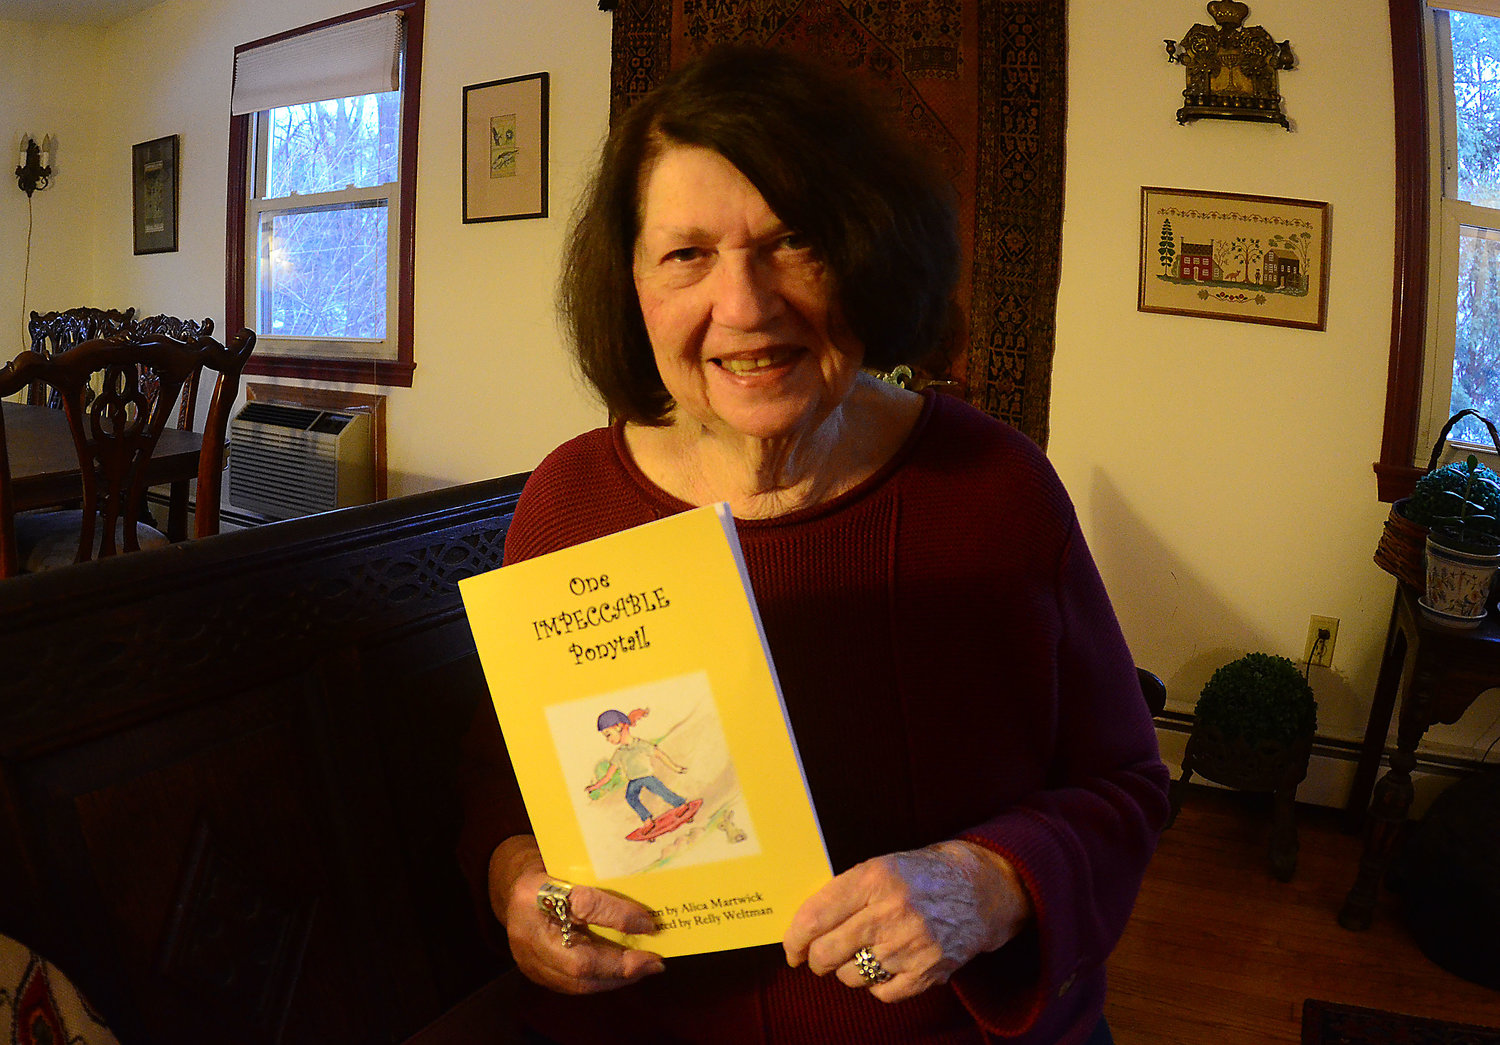 Longtime Barrington resident Relly Weltman enjoyed the opportunity of working with her daughter on the children's book "One IMPECCABLE Ponytail" but at times found the work a bit challenging.